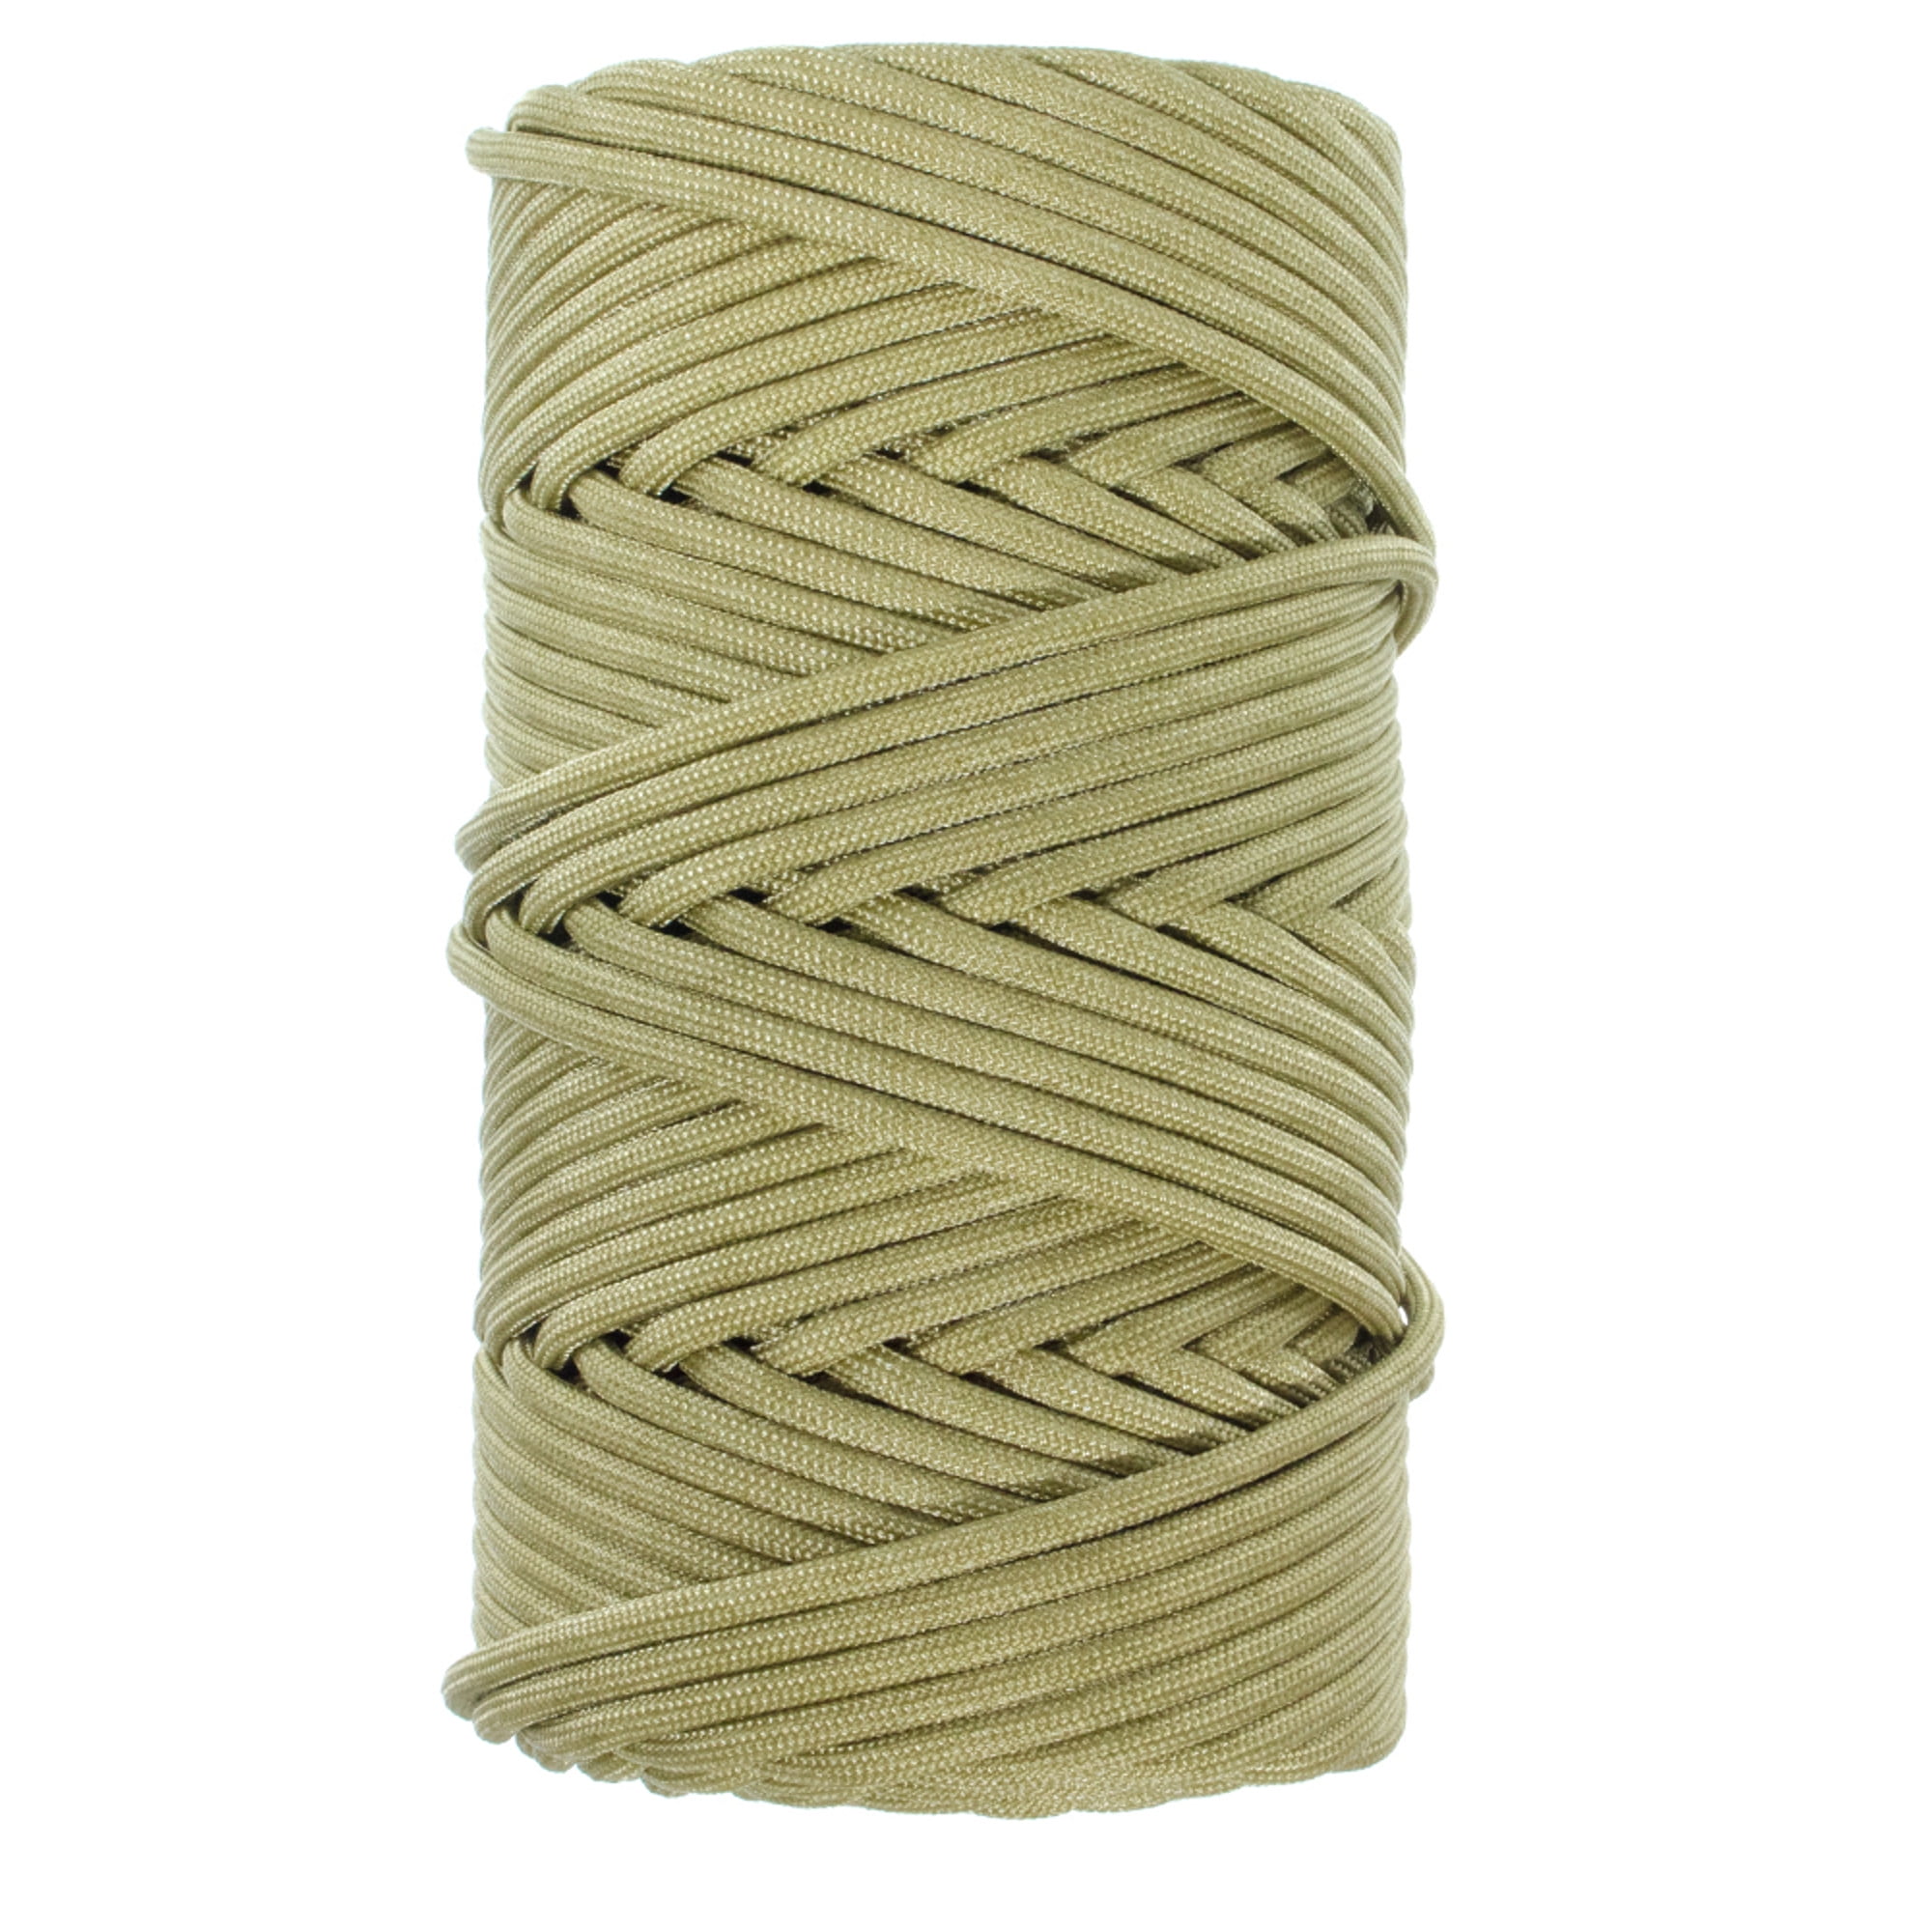 Wholesale 550 lb Paracord 100 ft strand MADE IN USA Camo MilSpec Neon Yellow 